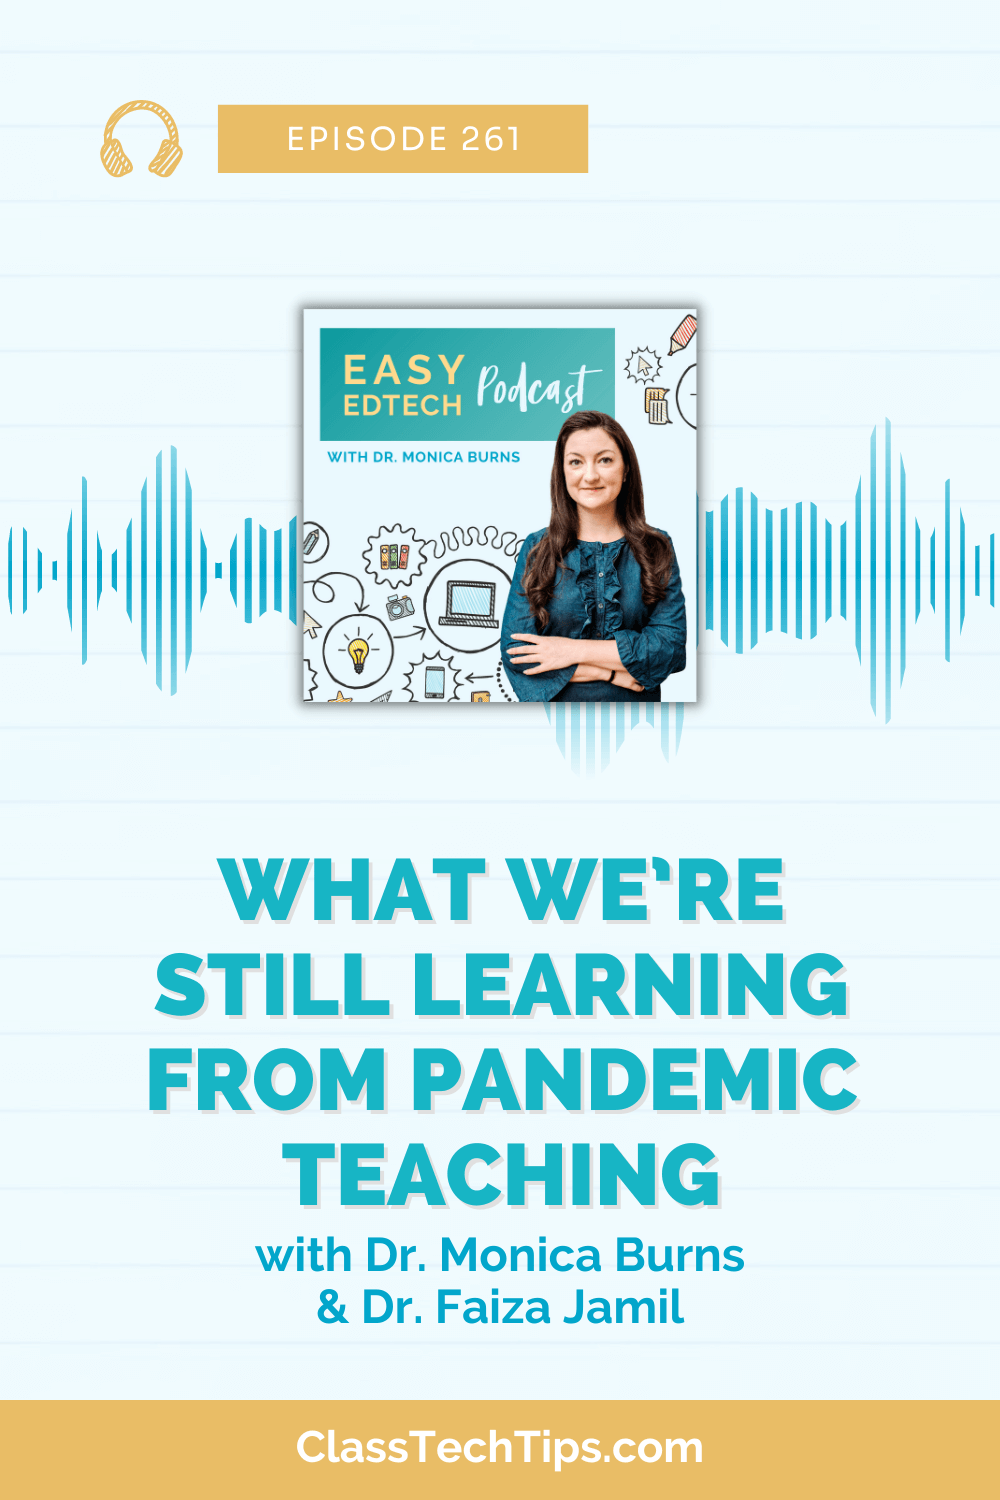 Graphic for Easy EdTech Podcast Episode 261 featuring Dr. Monica Burns and Dr. Faiza Jamil discussing "What We're Still Learning from Pandemic Teaching". The graphic has a waveform and doodles related to technology and education.